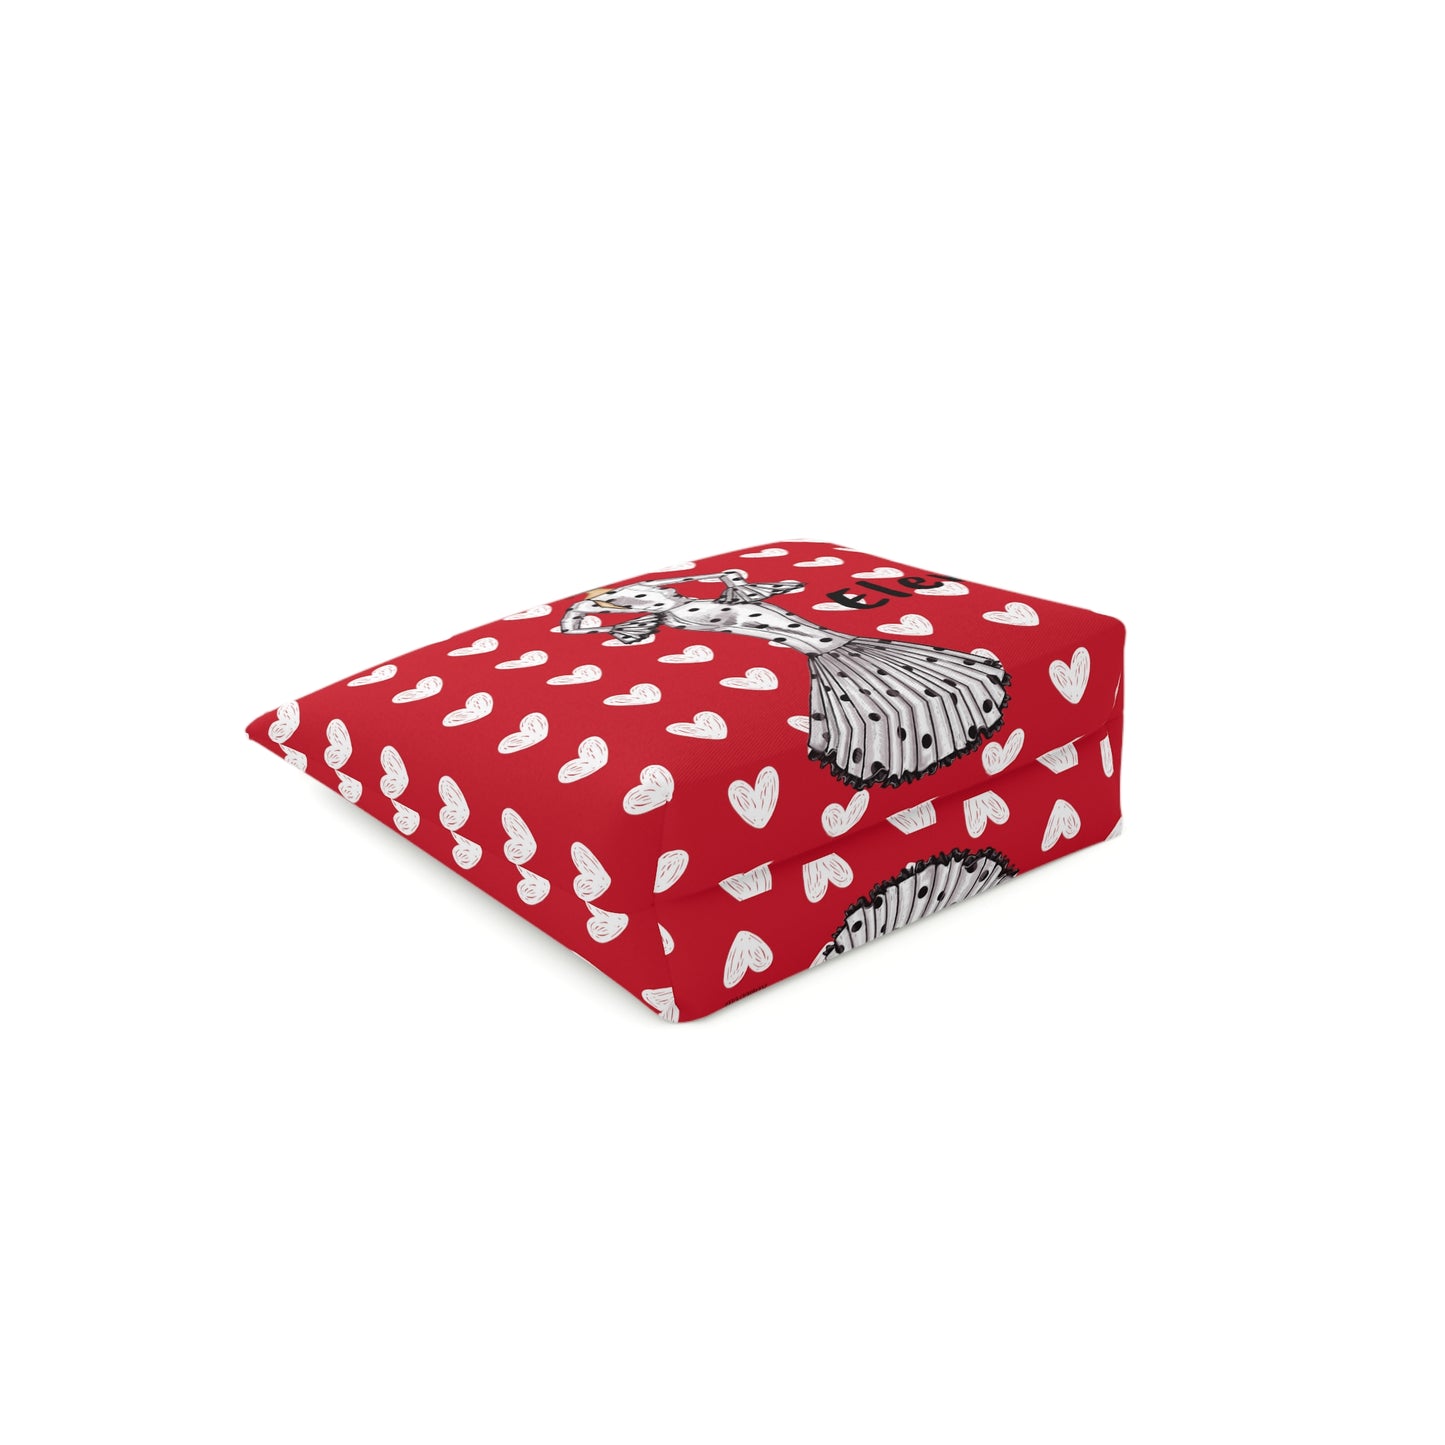 a red blanket with white hearts on it